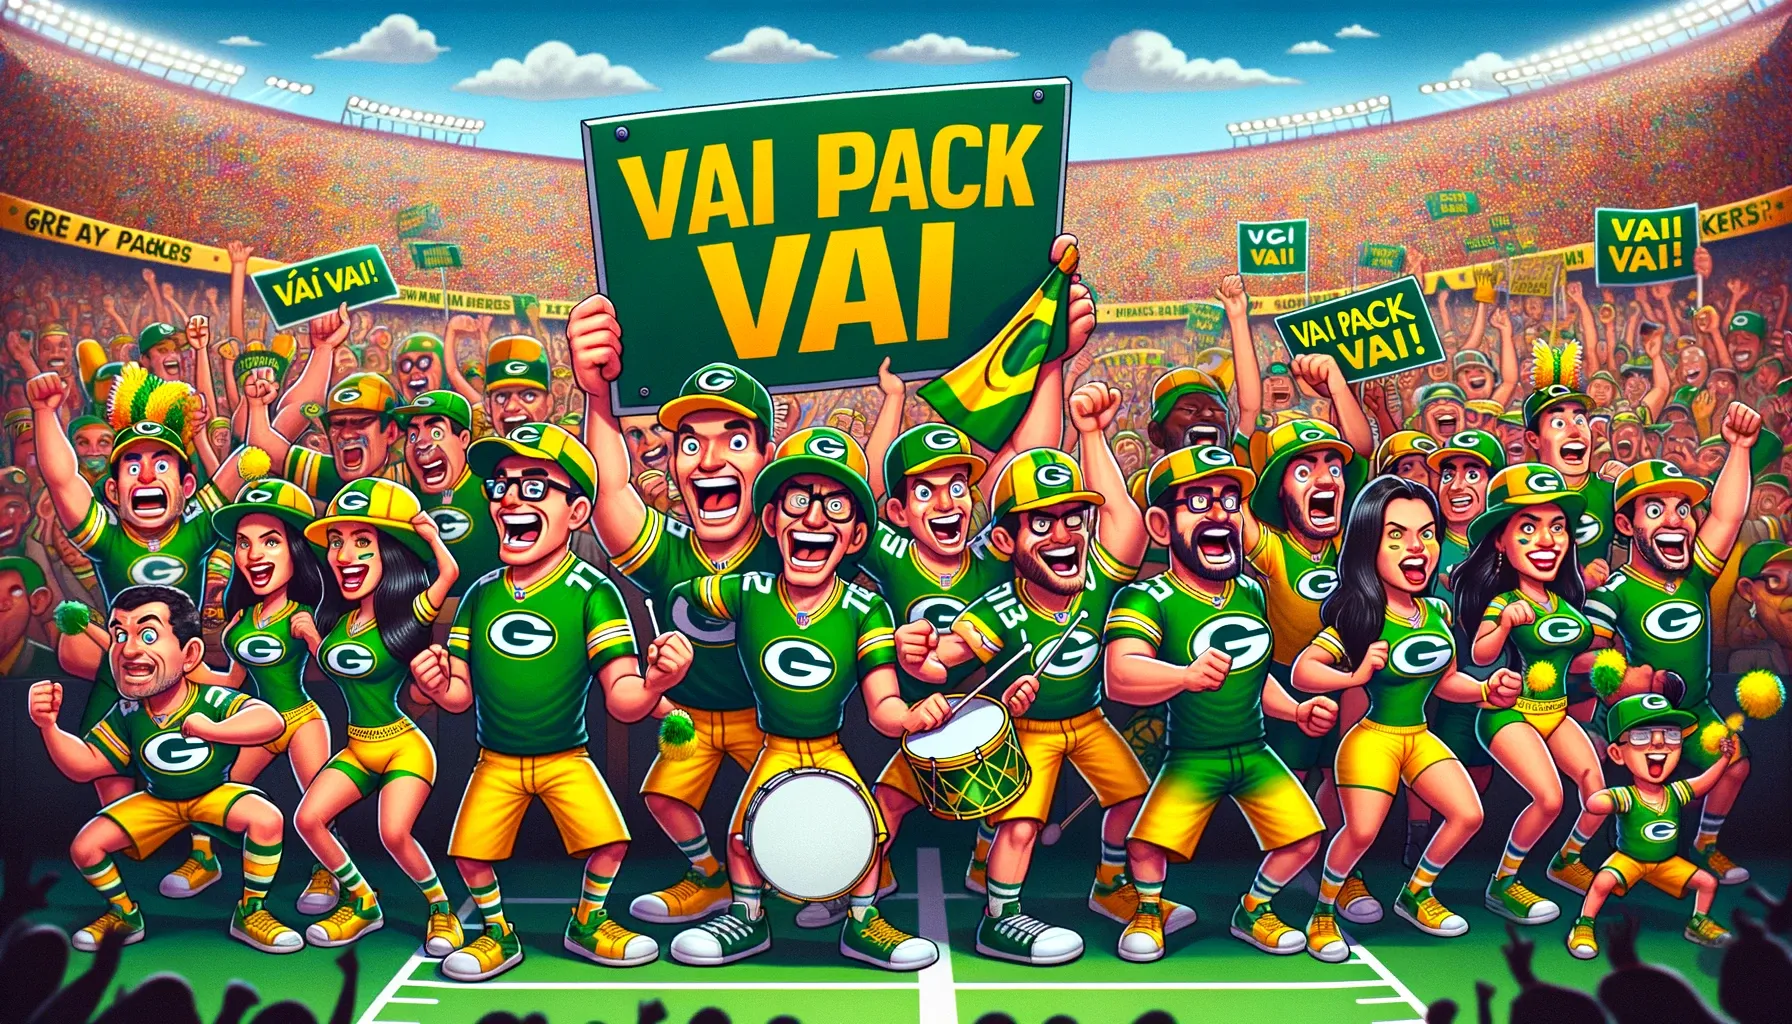 Green Bay Packers fans learning Go Pack Go in Portuguese